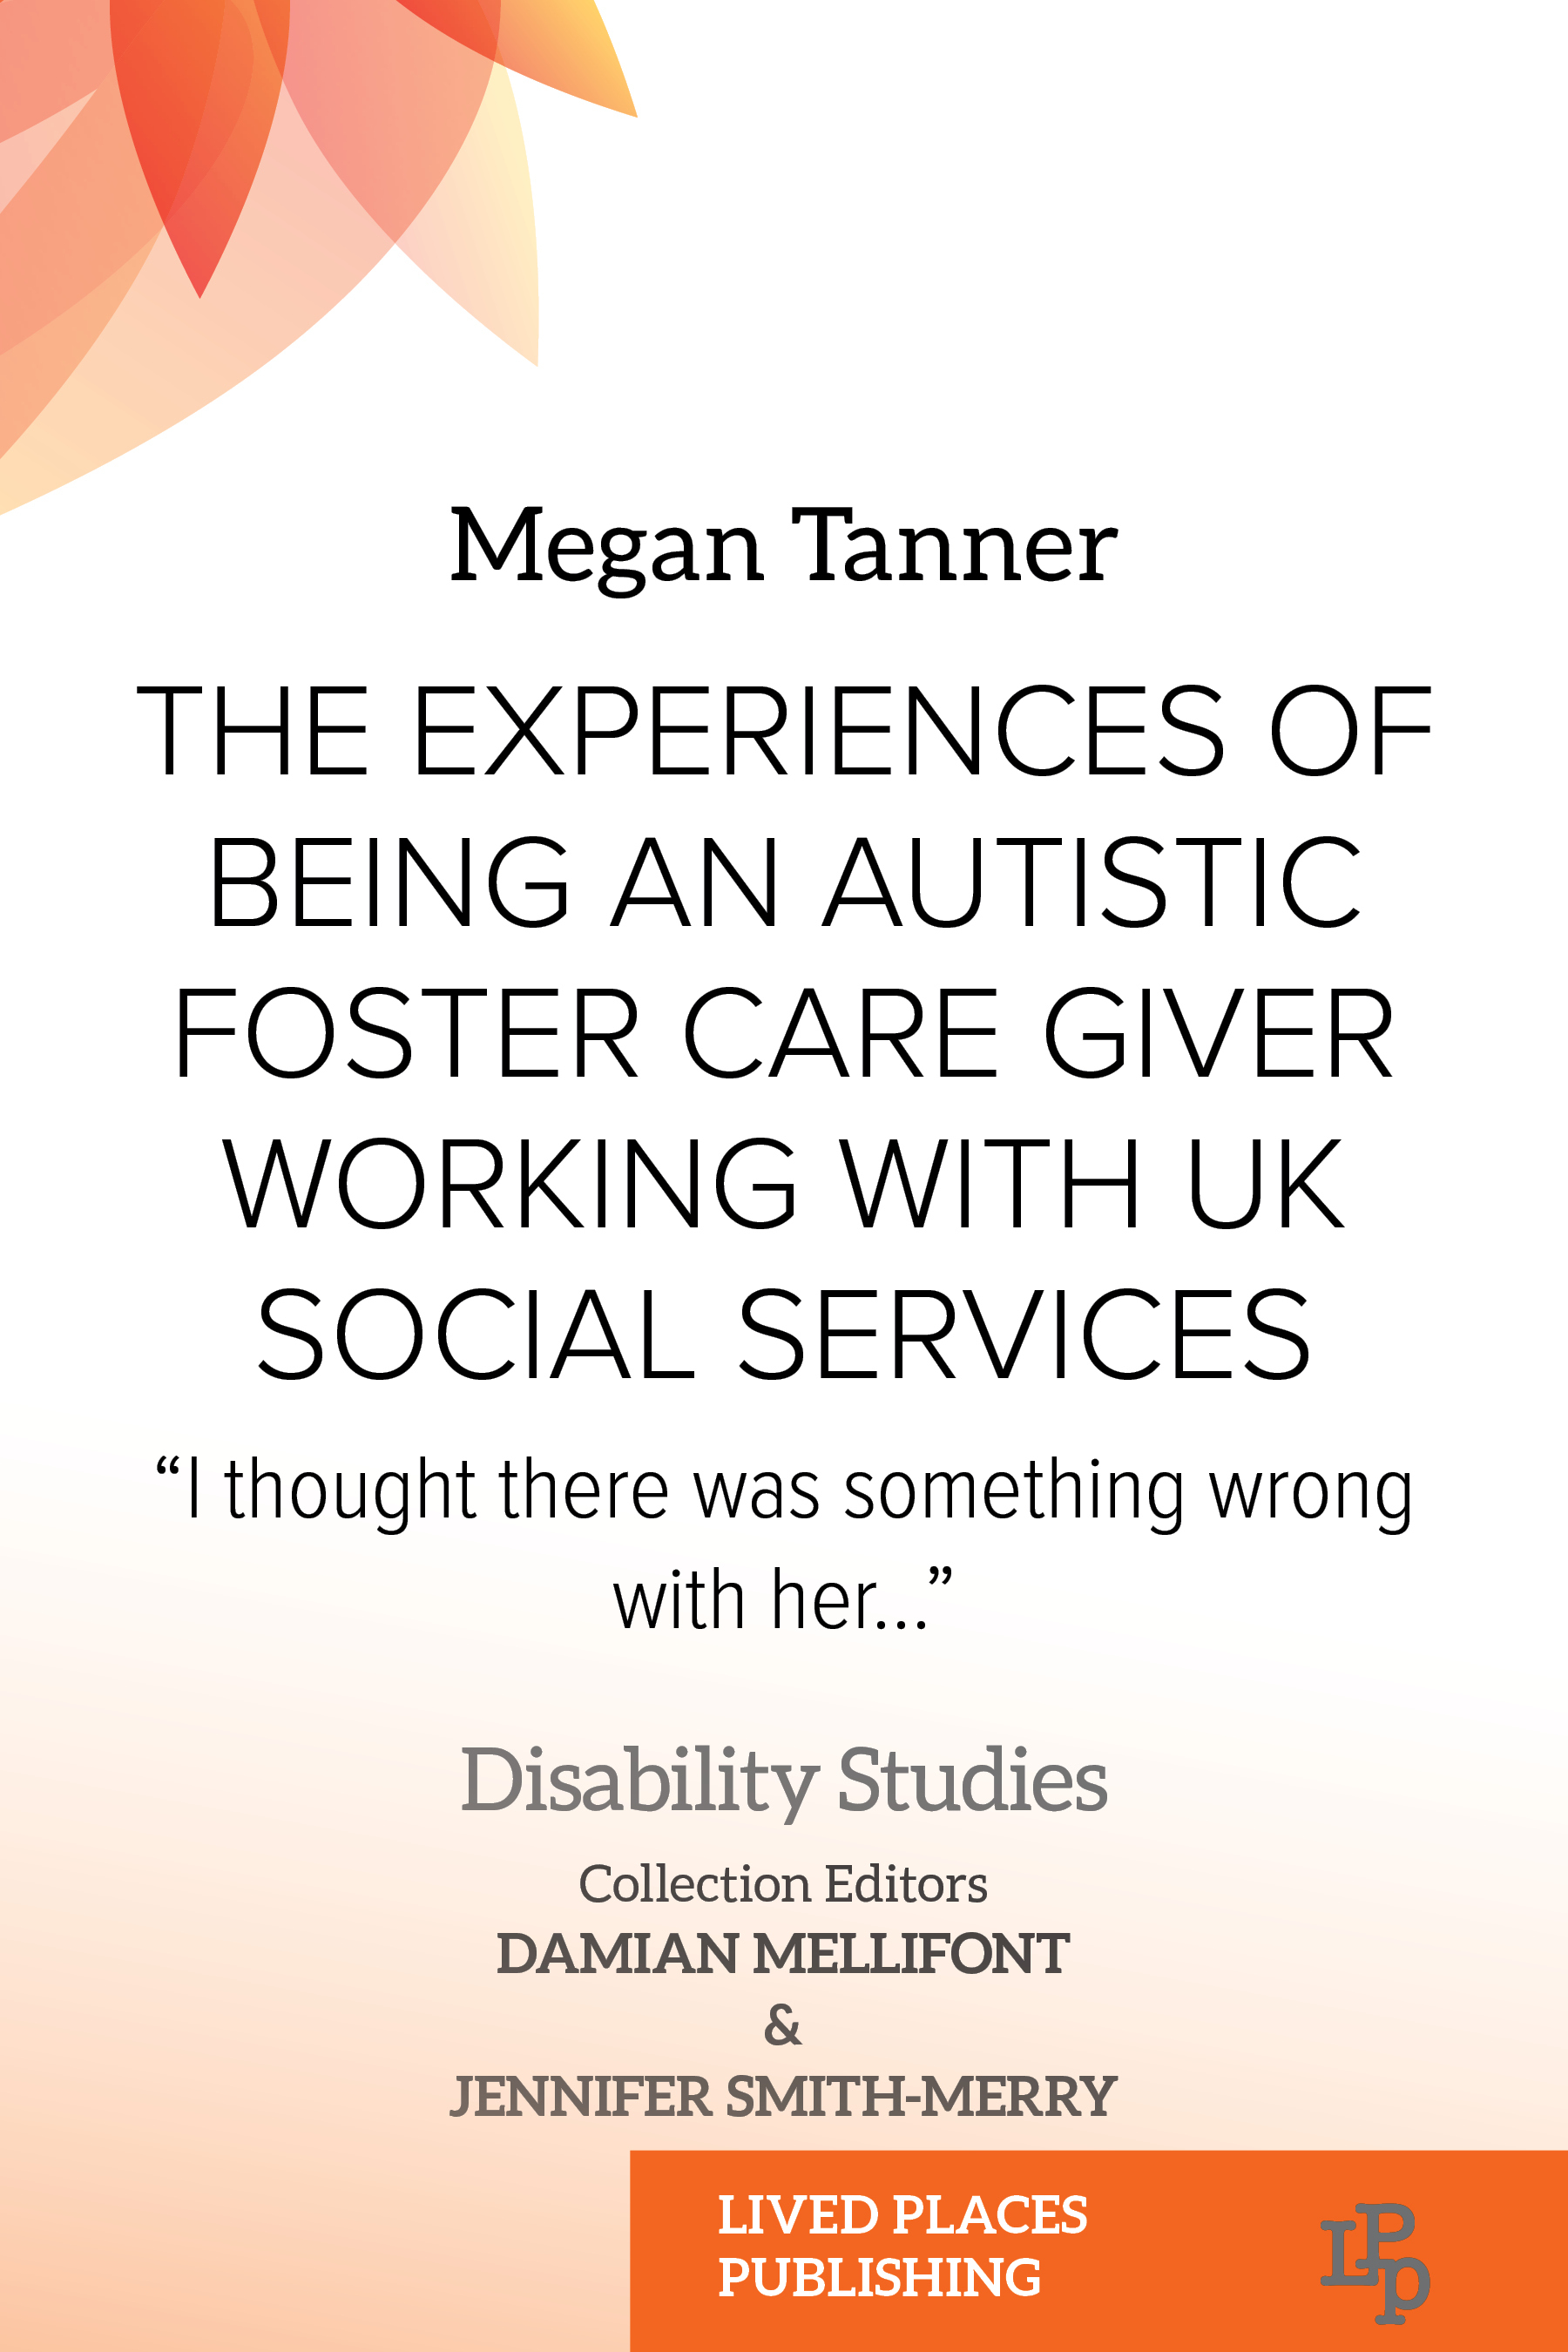 Experiences of Being an Autistic Foster Care Giver Working with UK Social Services